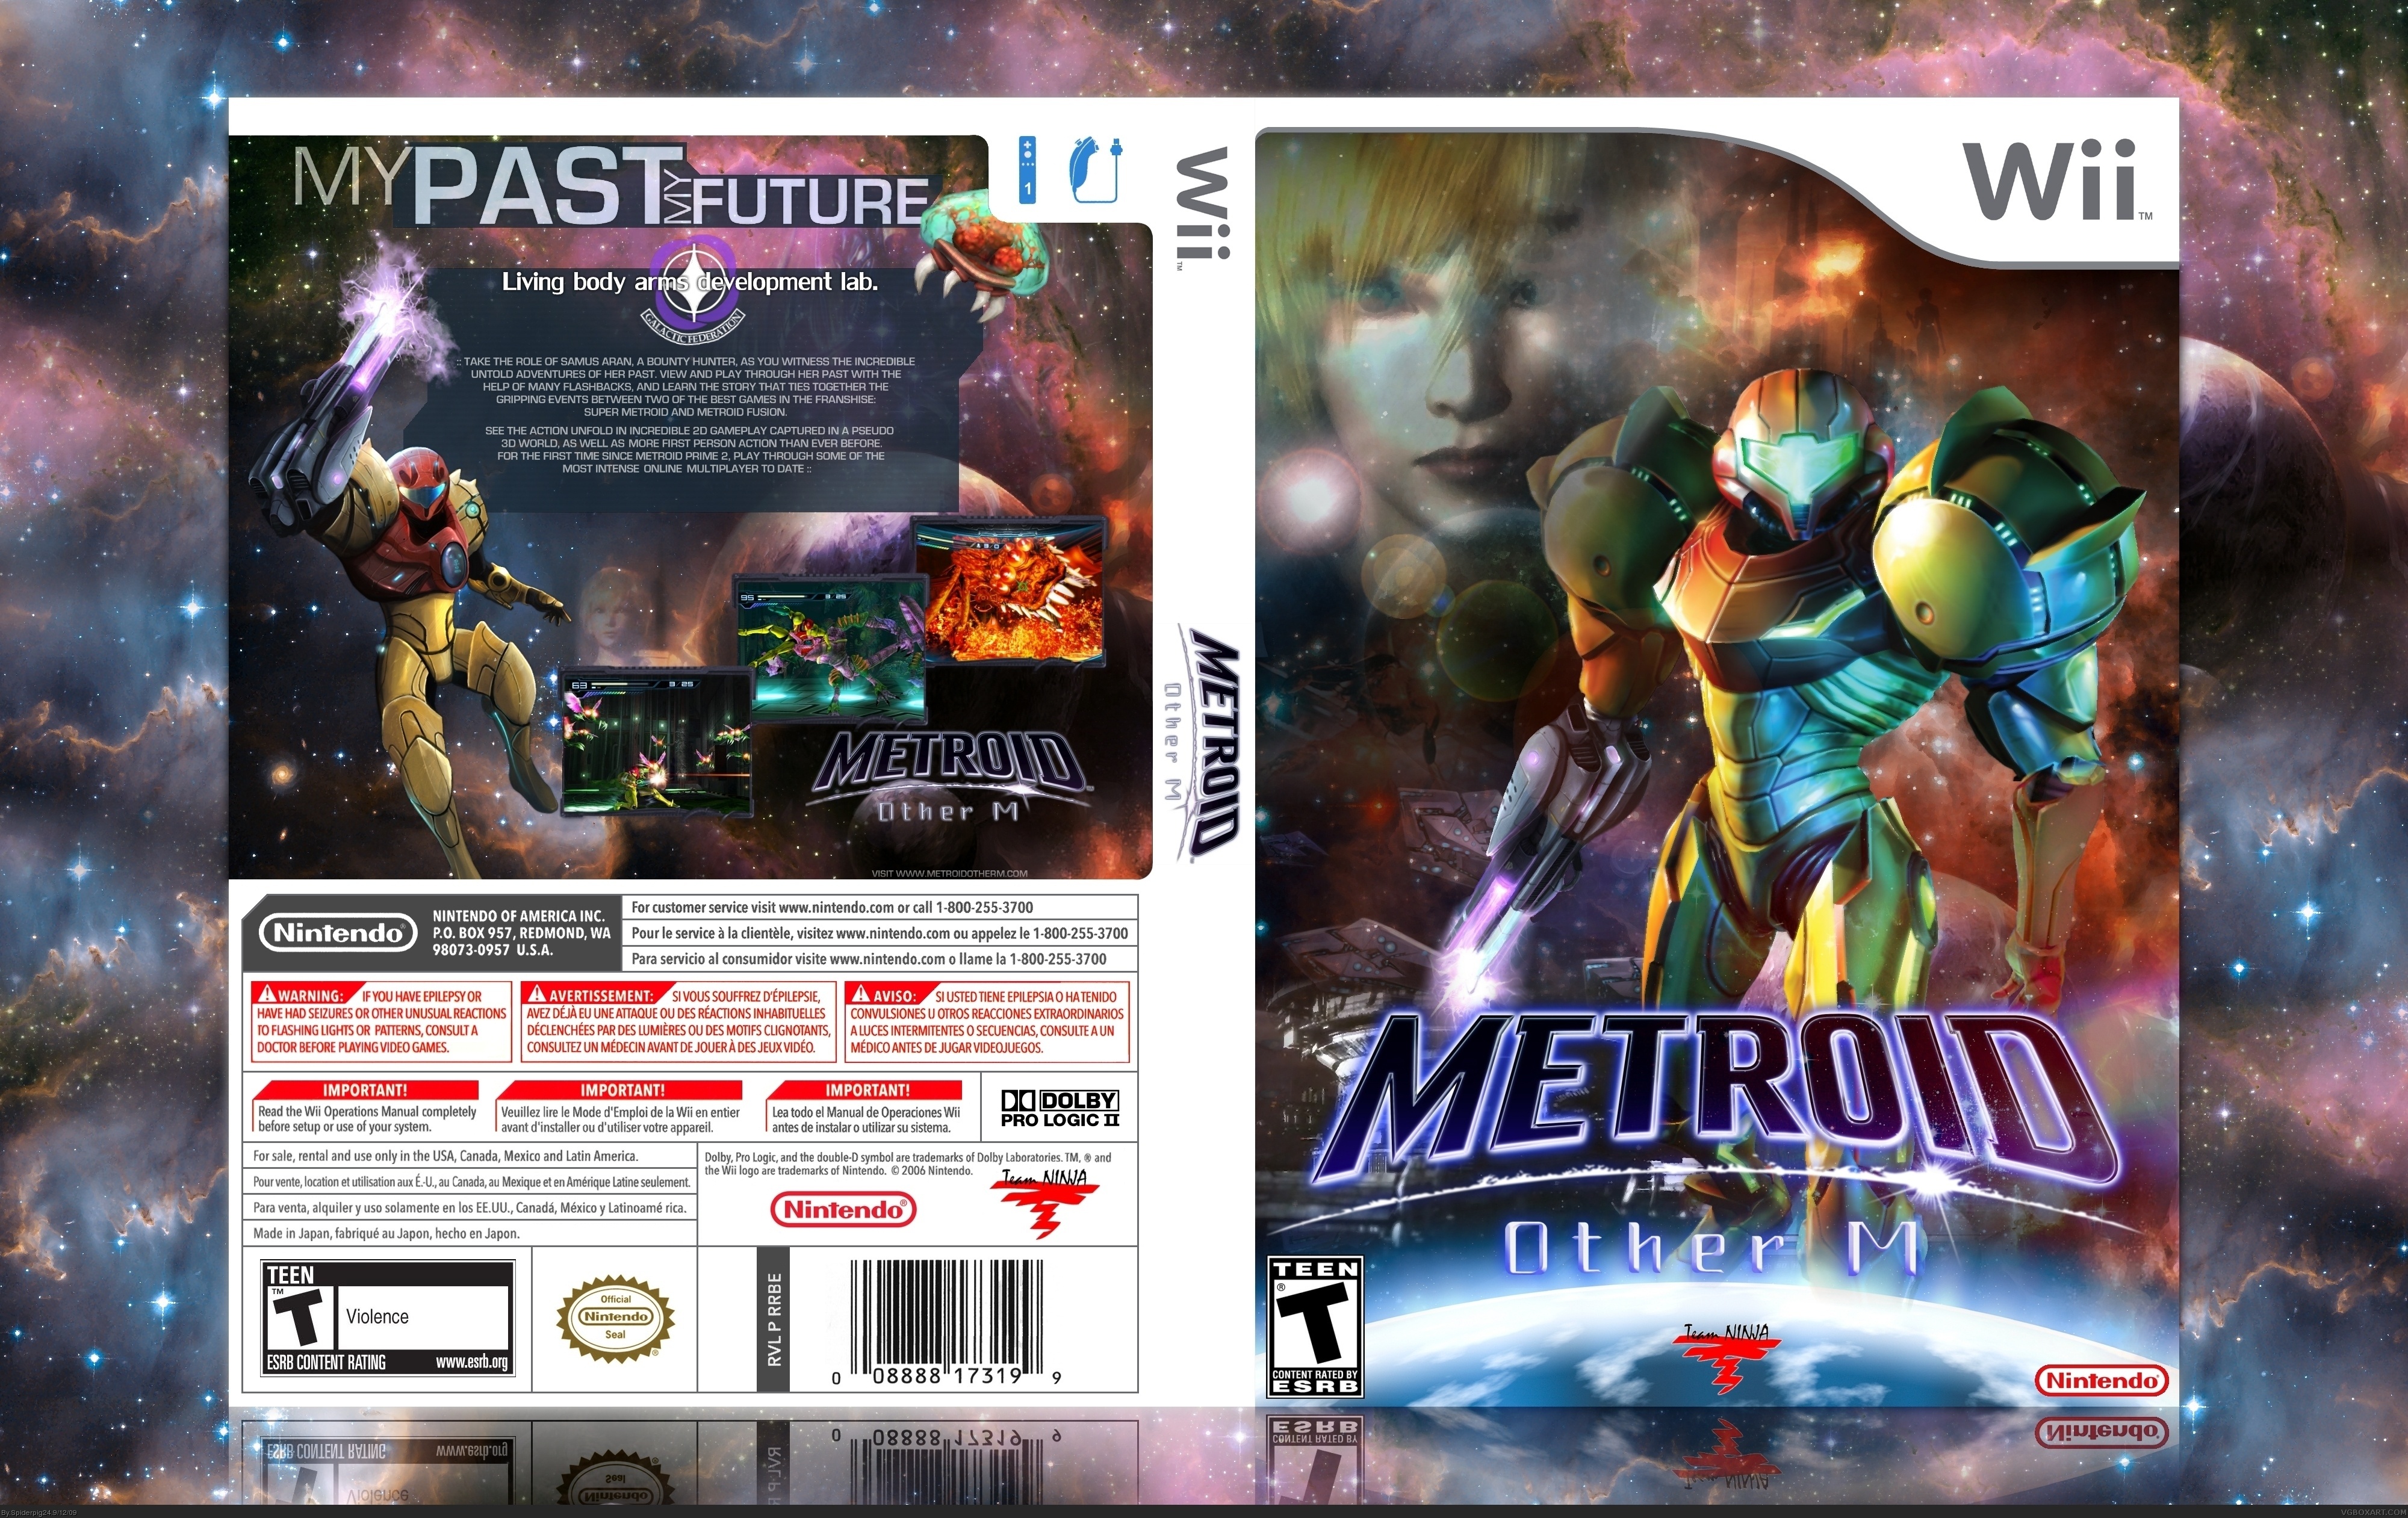 metroid other m story download